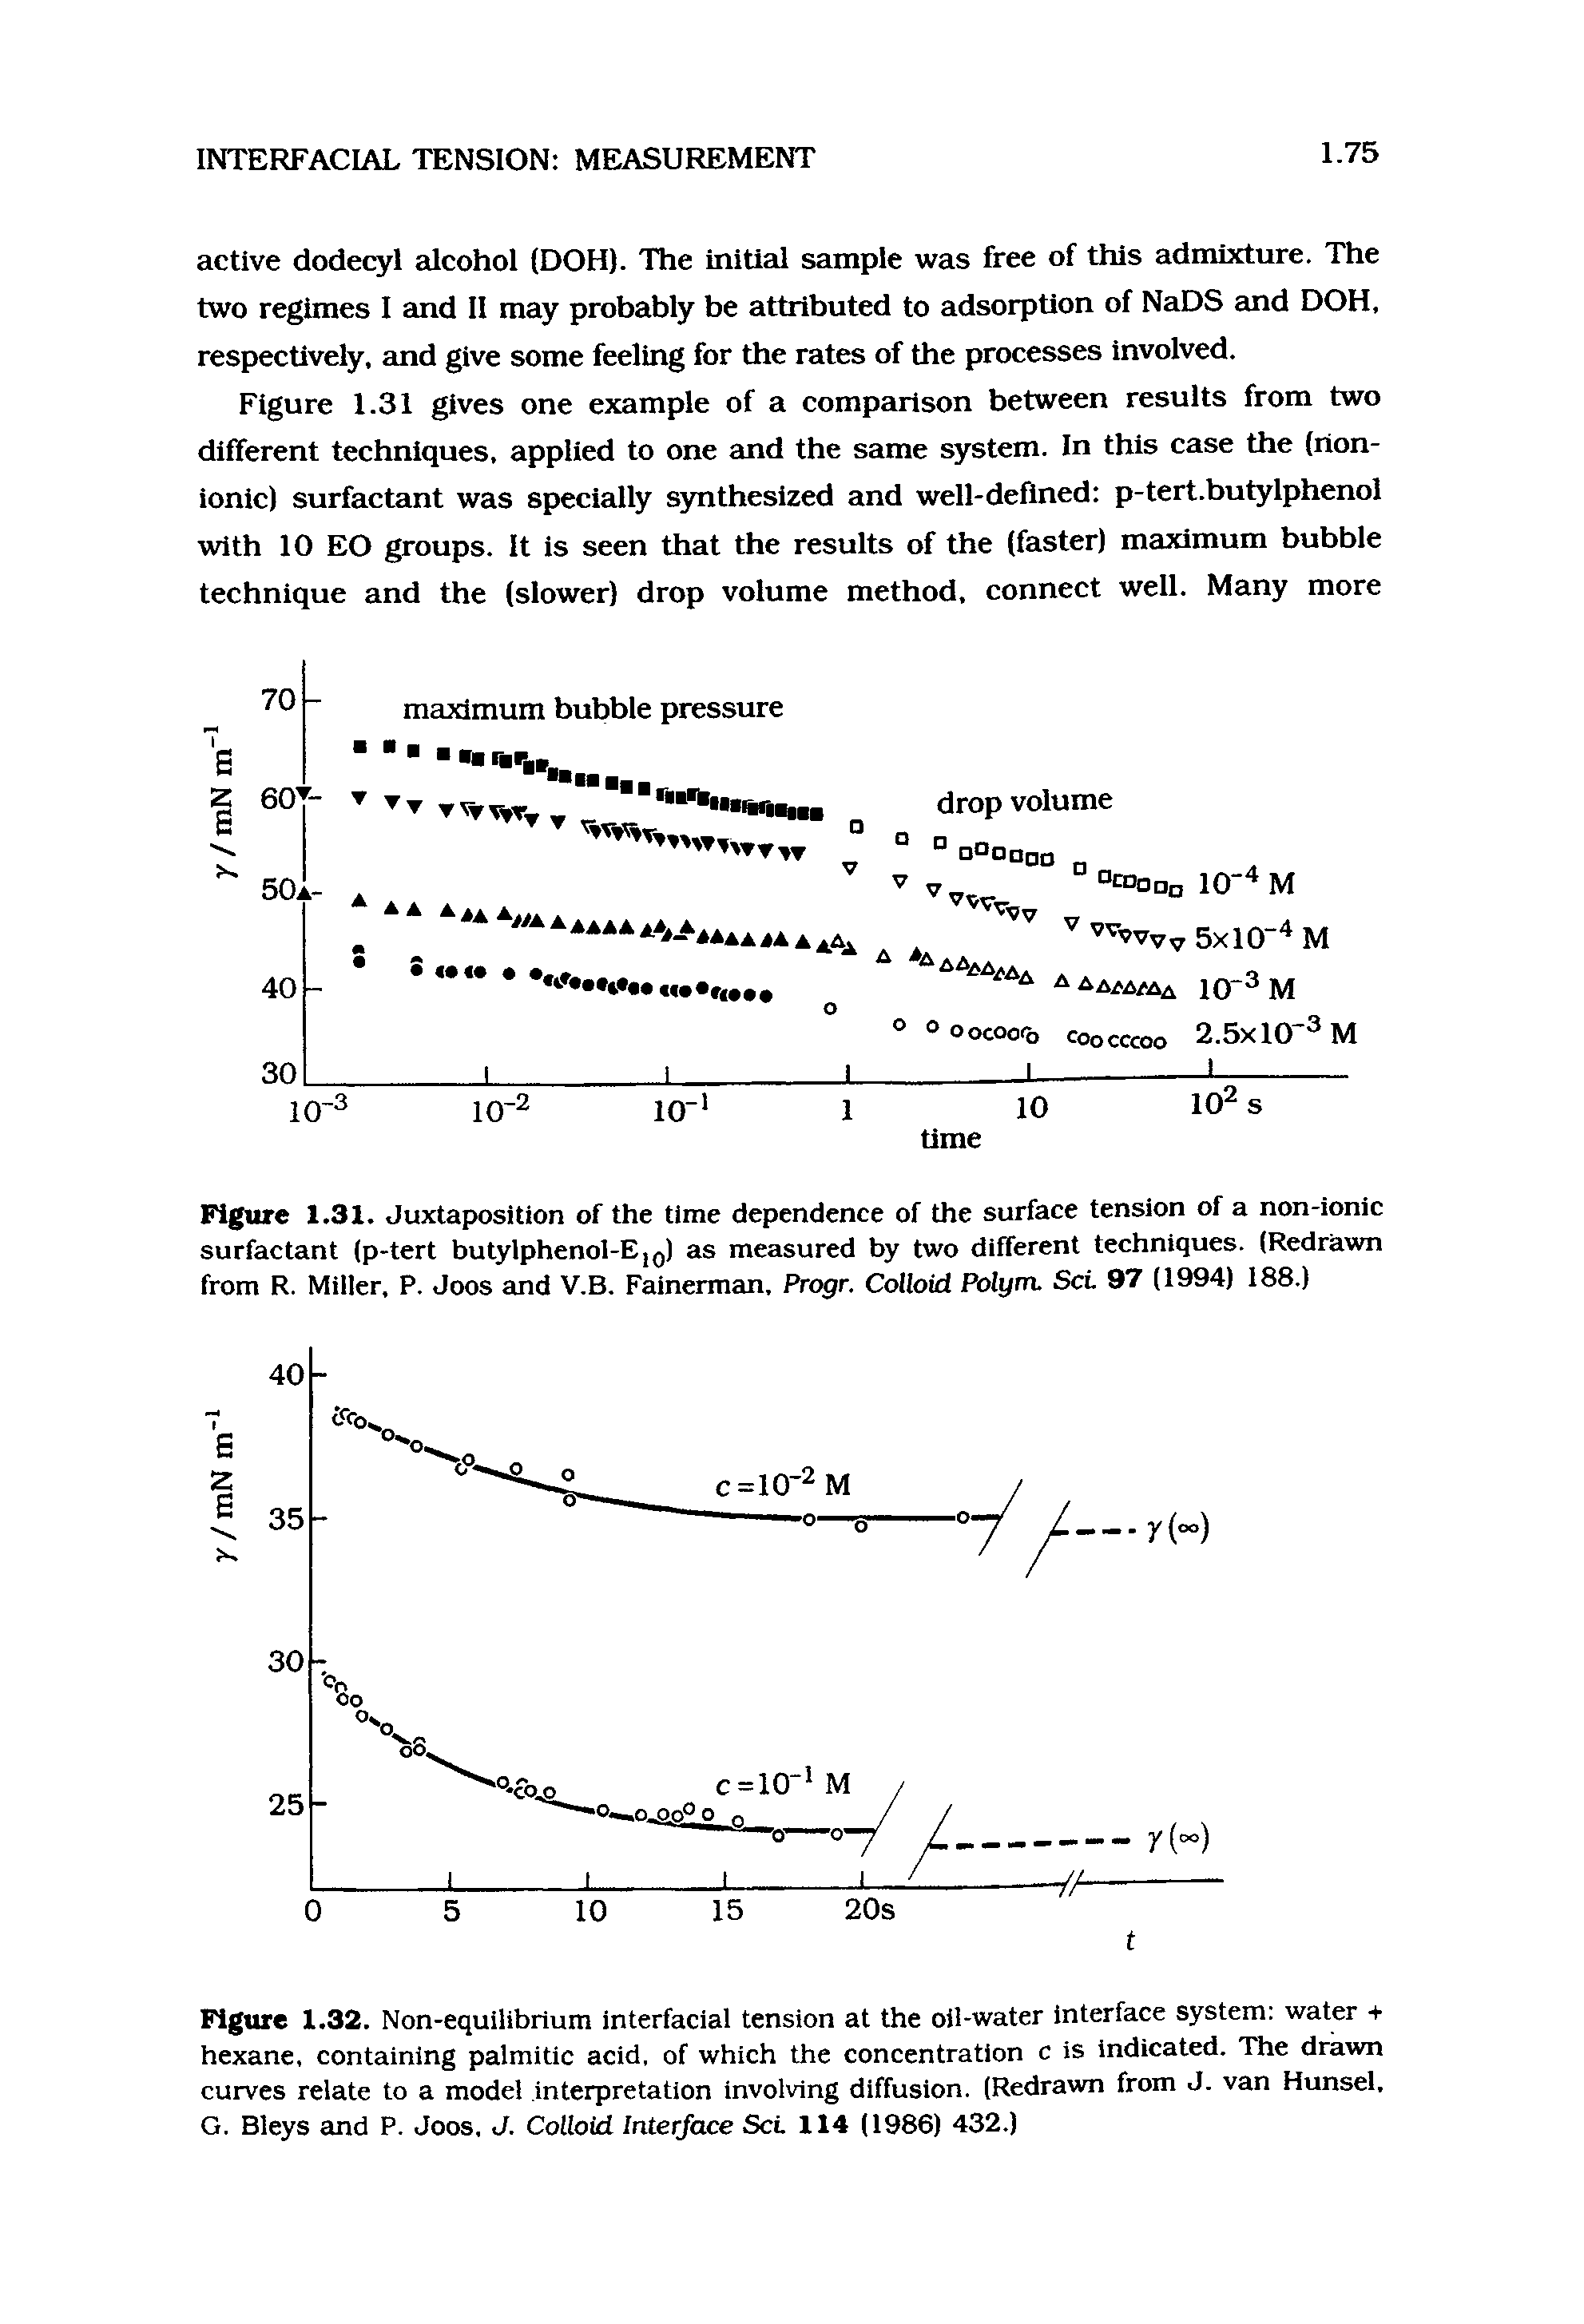 Figure 1.32. Non-equilibrium interfacial tension at the oil-water interface system water + hexane, containing palmitic acid, of which the concentration c is indicated. The drawn curves relate to a model interpretation involving diffusion. (Redrawn from J. van Hunsel, G. Bleys and P. Joos, J. Colloid Interface Set 114 (1986) 432.)...